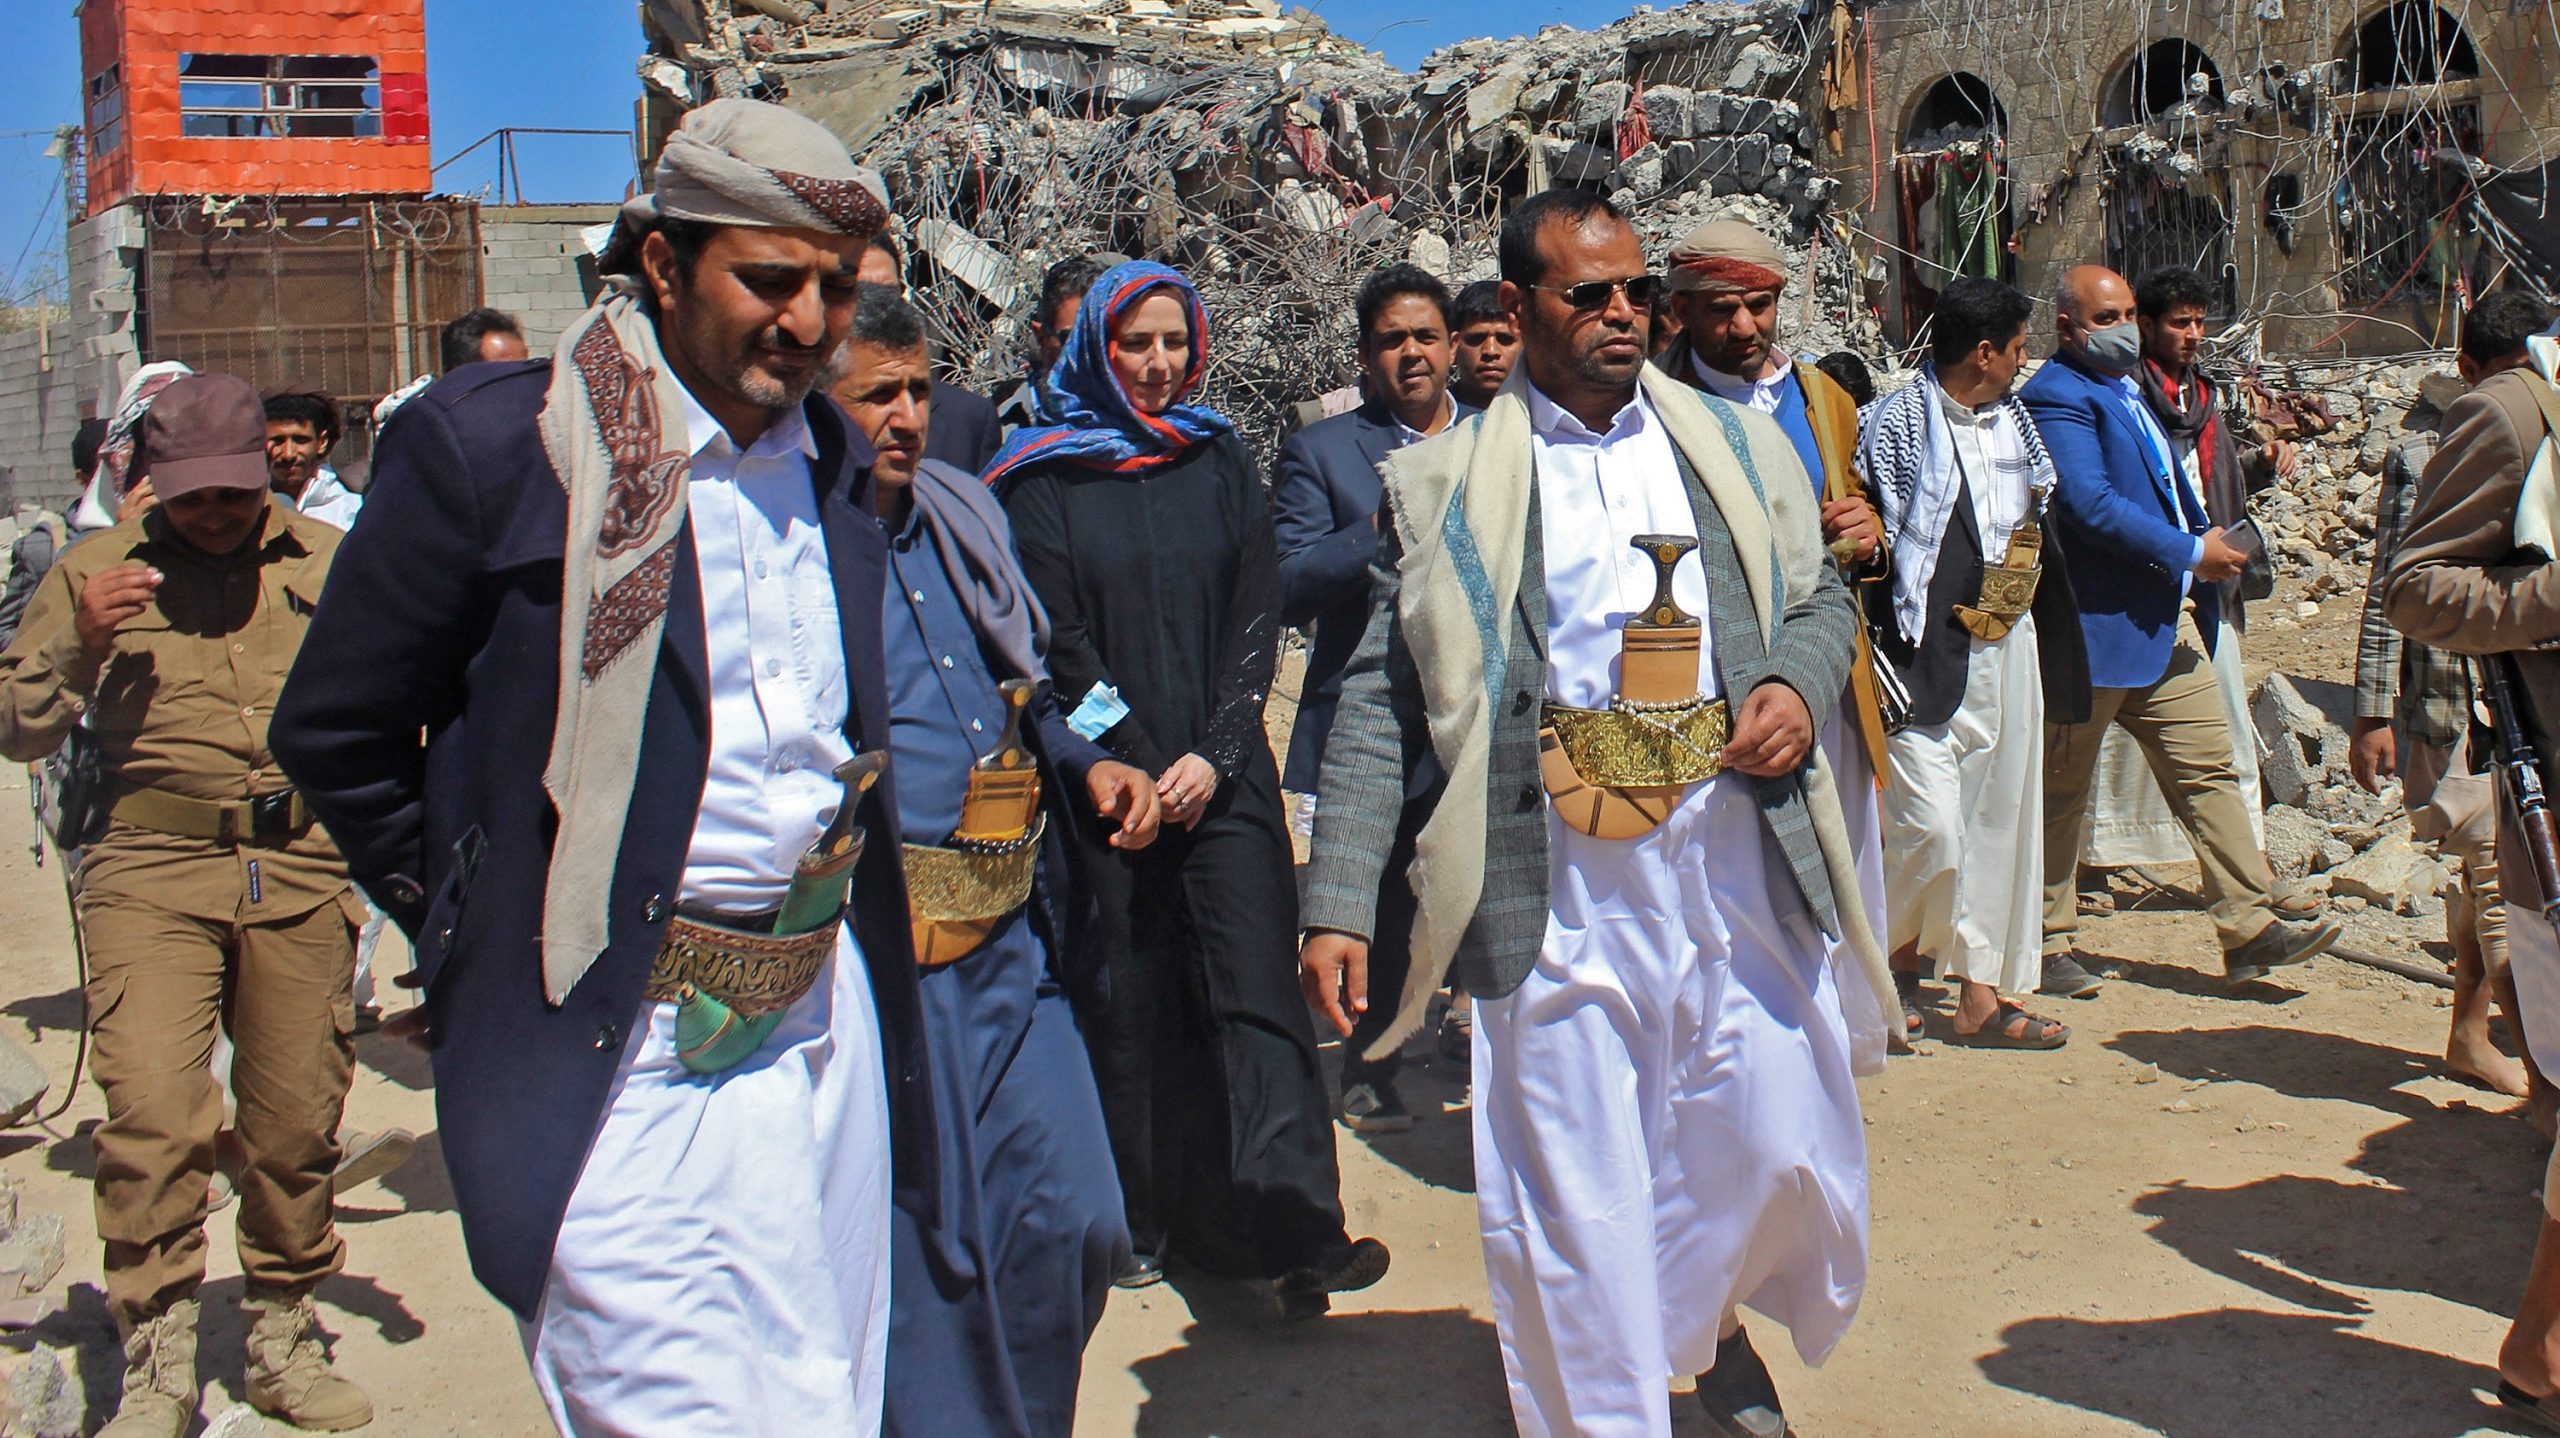 Houthis Agree To Discuss Lifting Siege on Taiz, Possibly Extend Truce